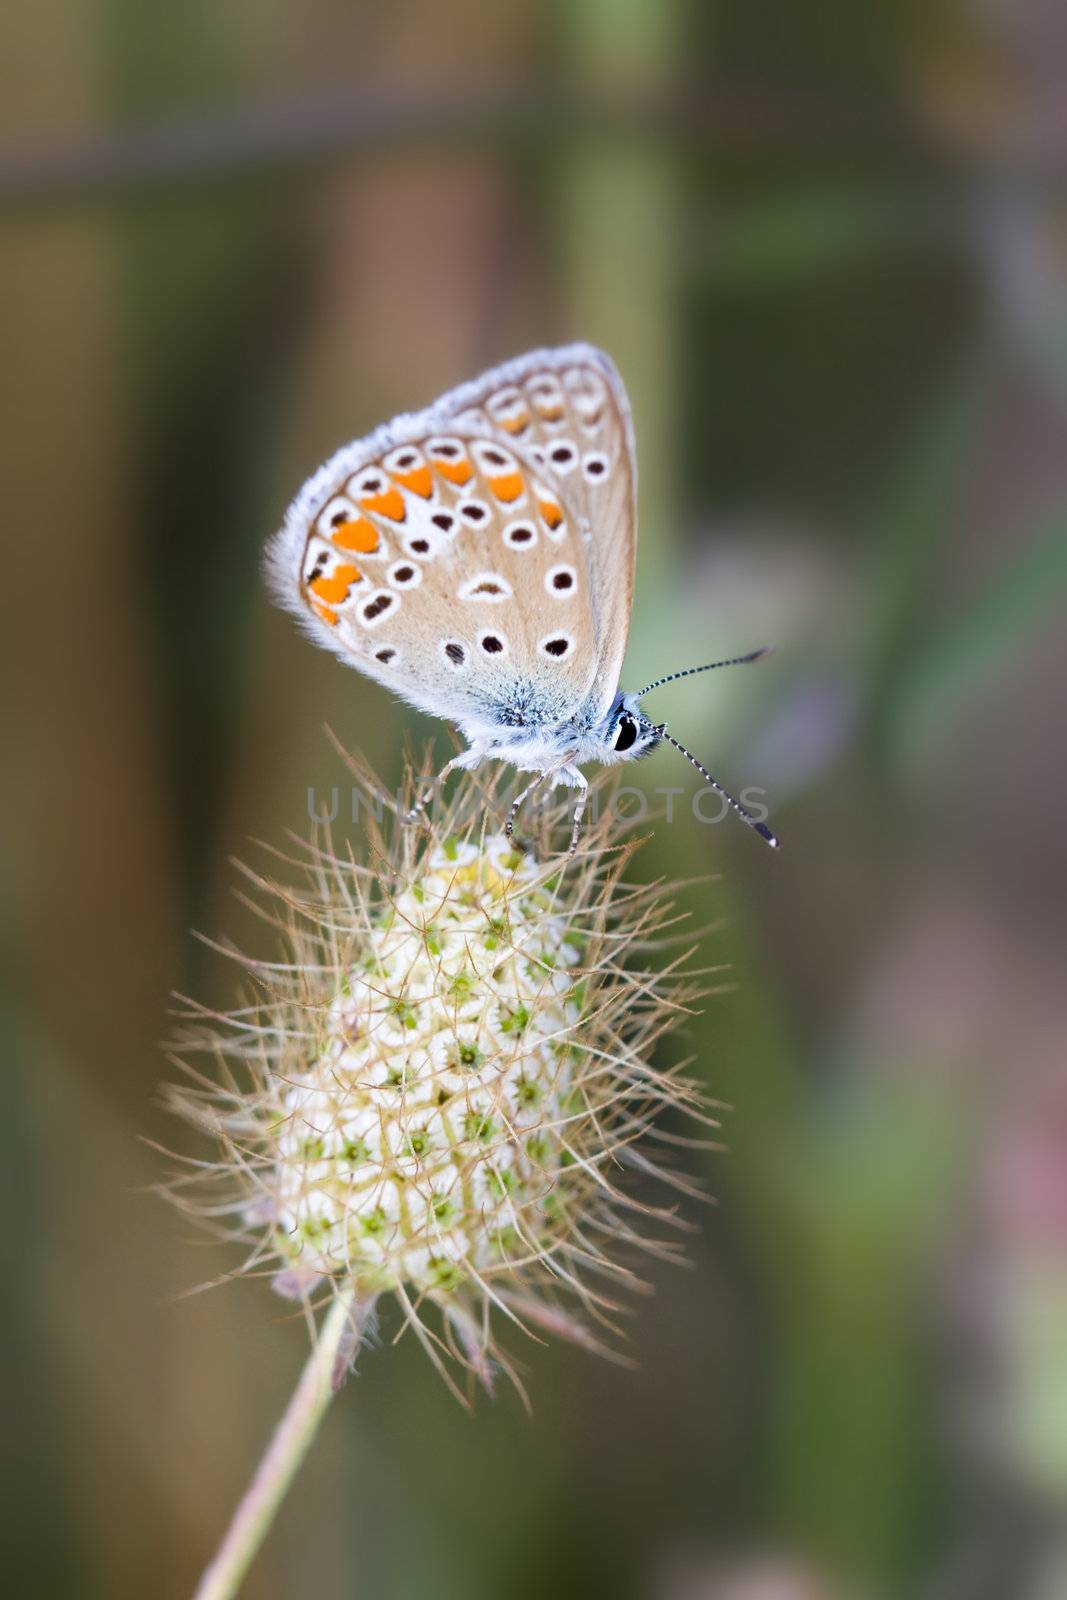 Chalkhill blue butterfly resting on a seedhead